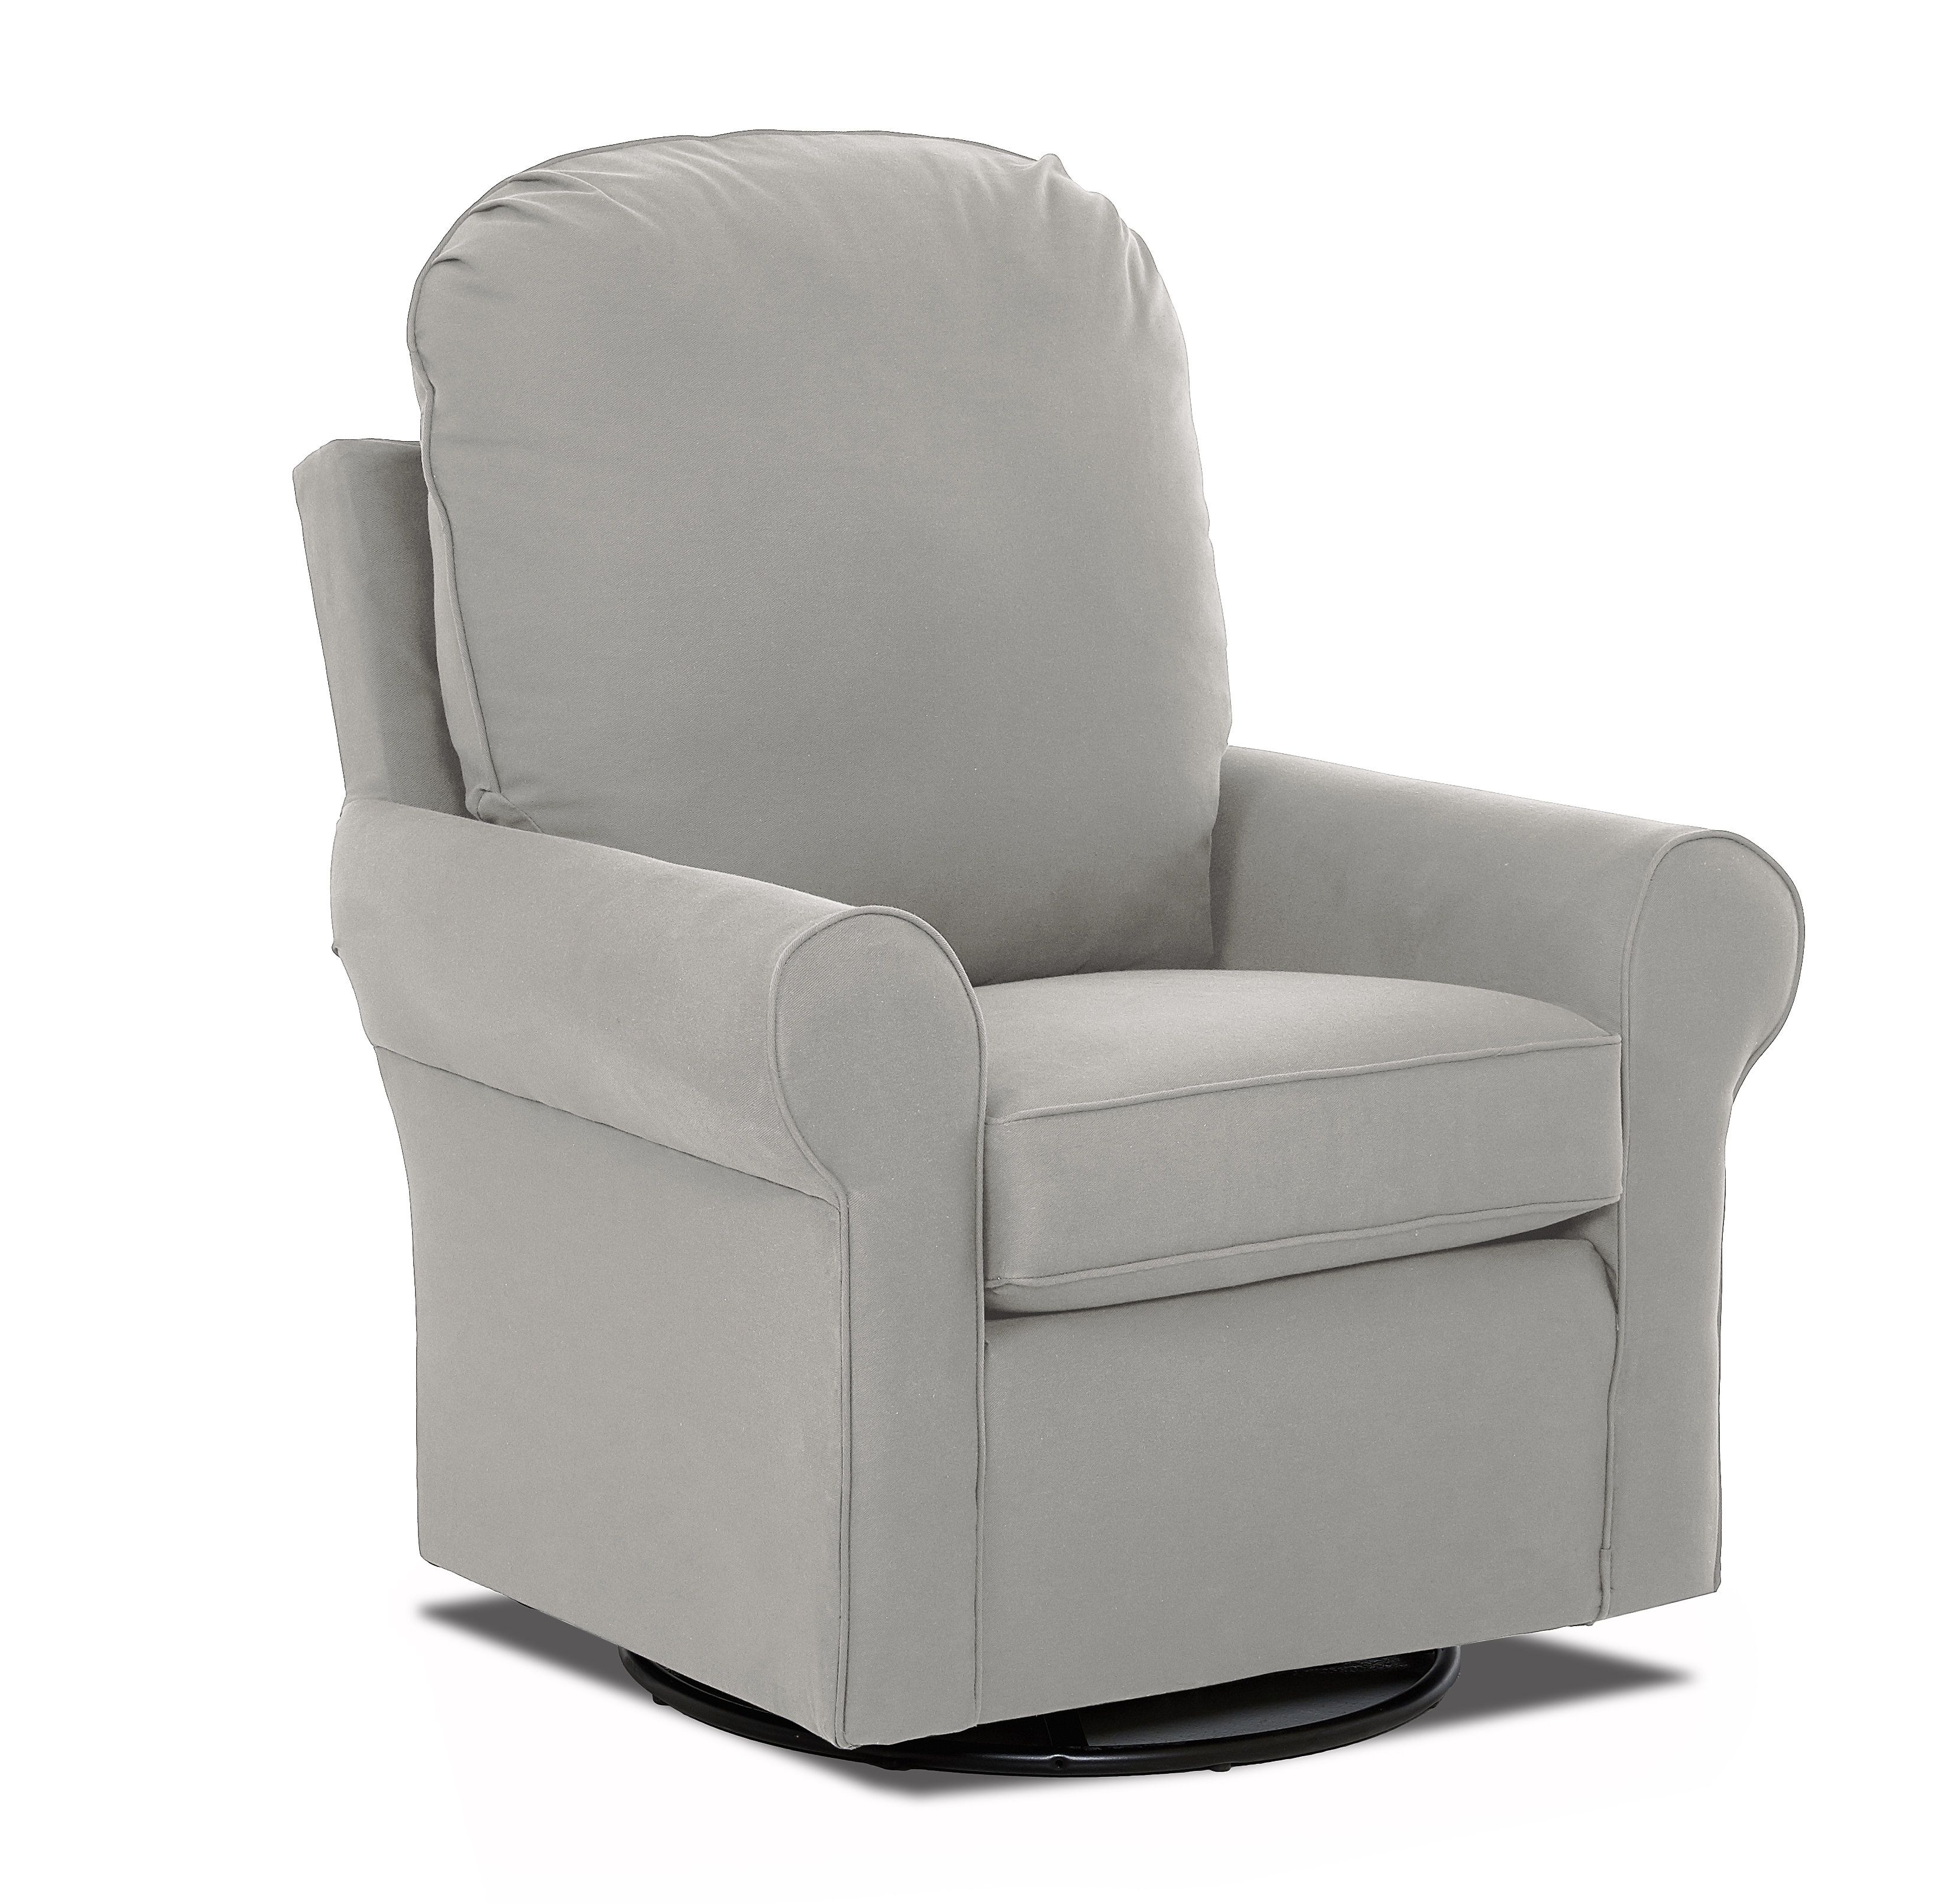 Klaussner Furniture Suffolk Swivel Glider | Wayfair With Bailey Roll Arm Skirted Swivel Gliders (View 10 of 25)